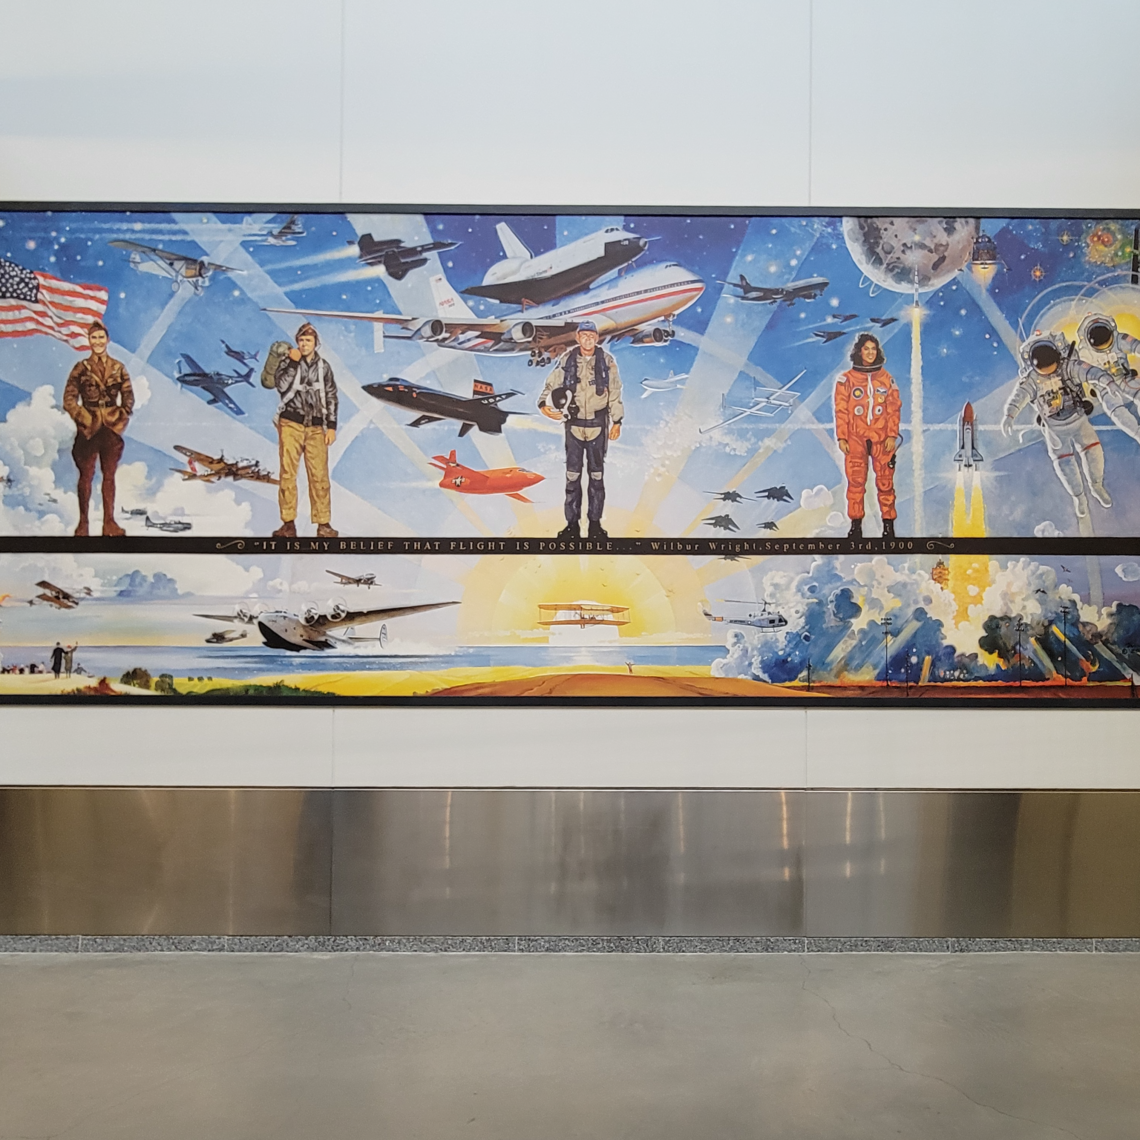 A section of a painting depicting aviators and astronauts with various flying machines behind them with earlier aviation/aviators to the left and more modern ones to the right. A quote from Wilbur Wright reading "It is my belief that flight is possible." is on a dark stripe, upon which aviators stand.